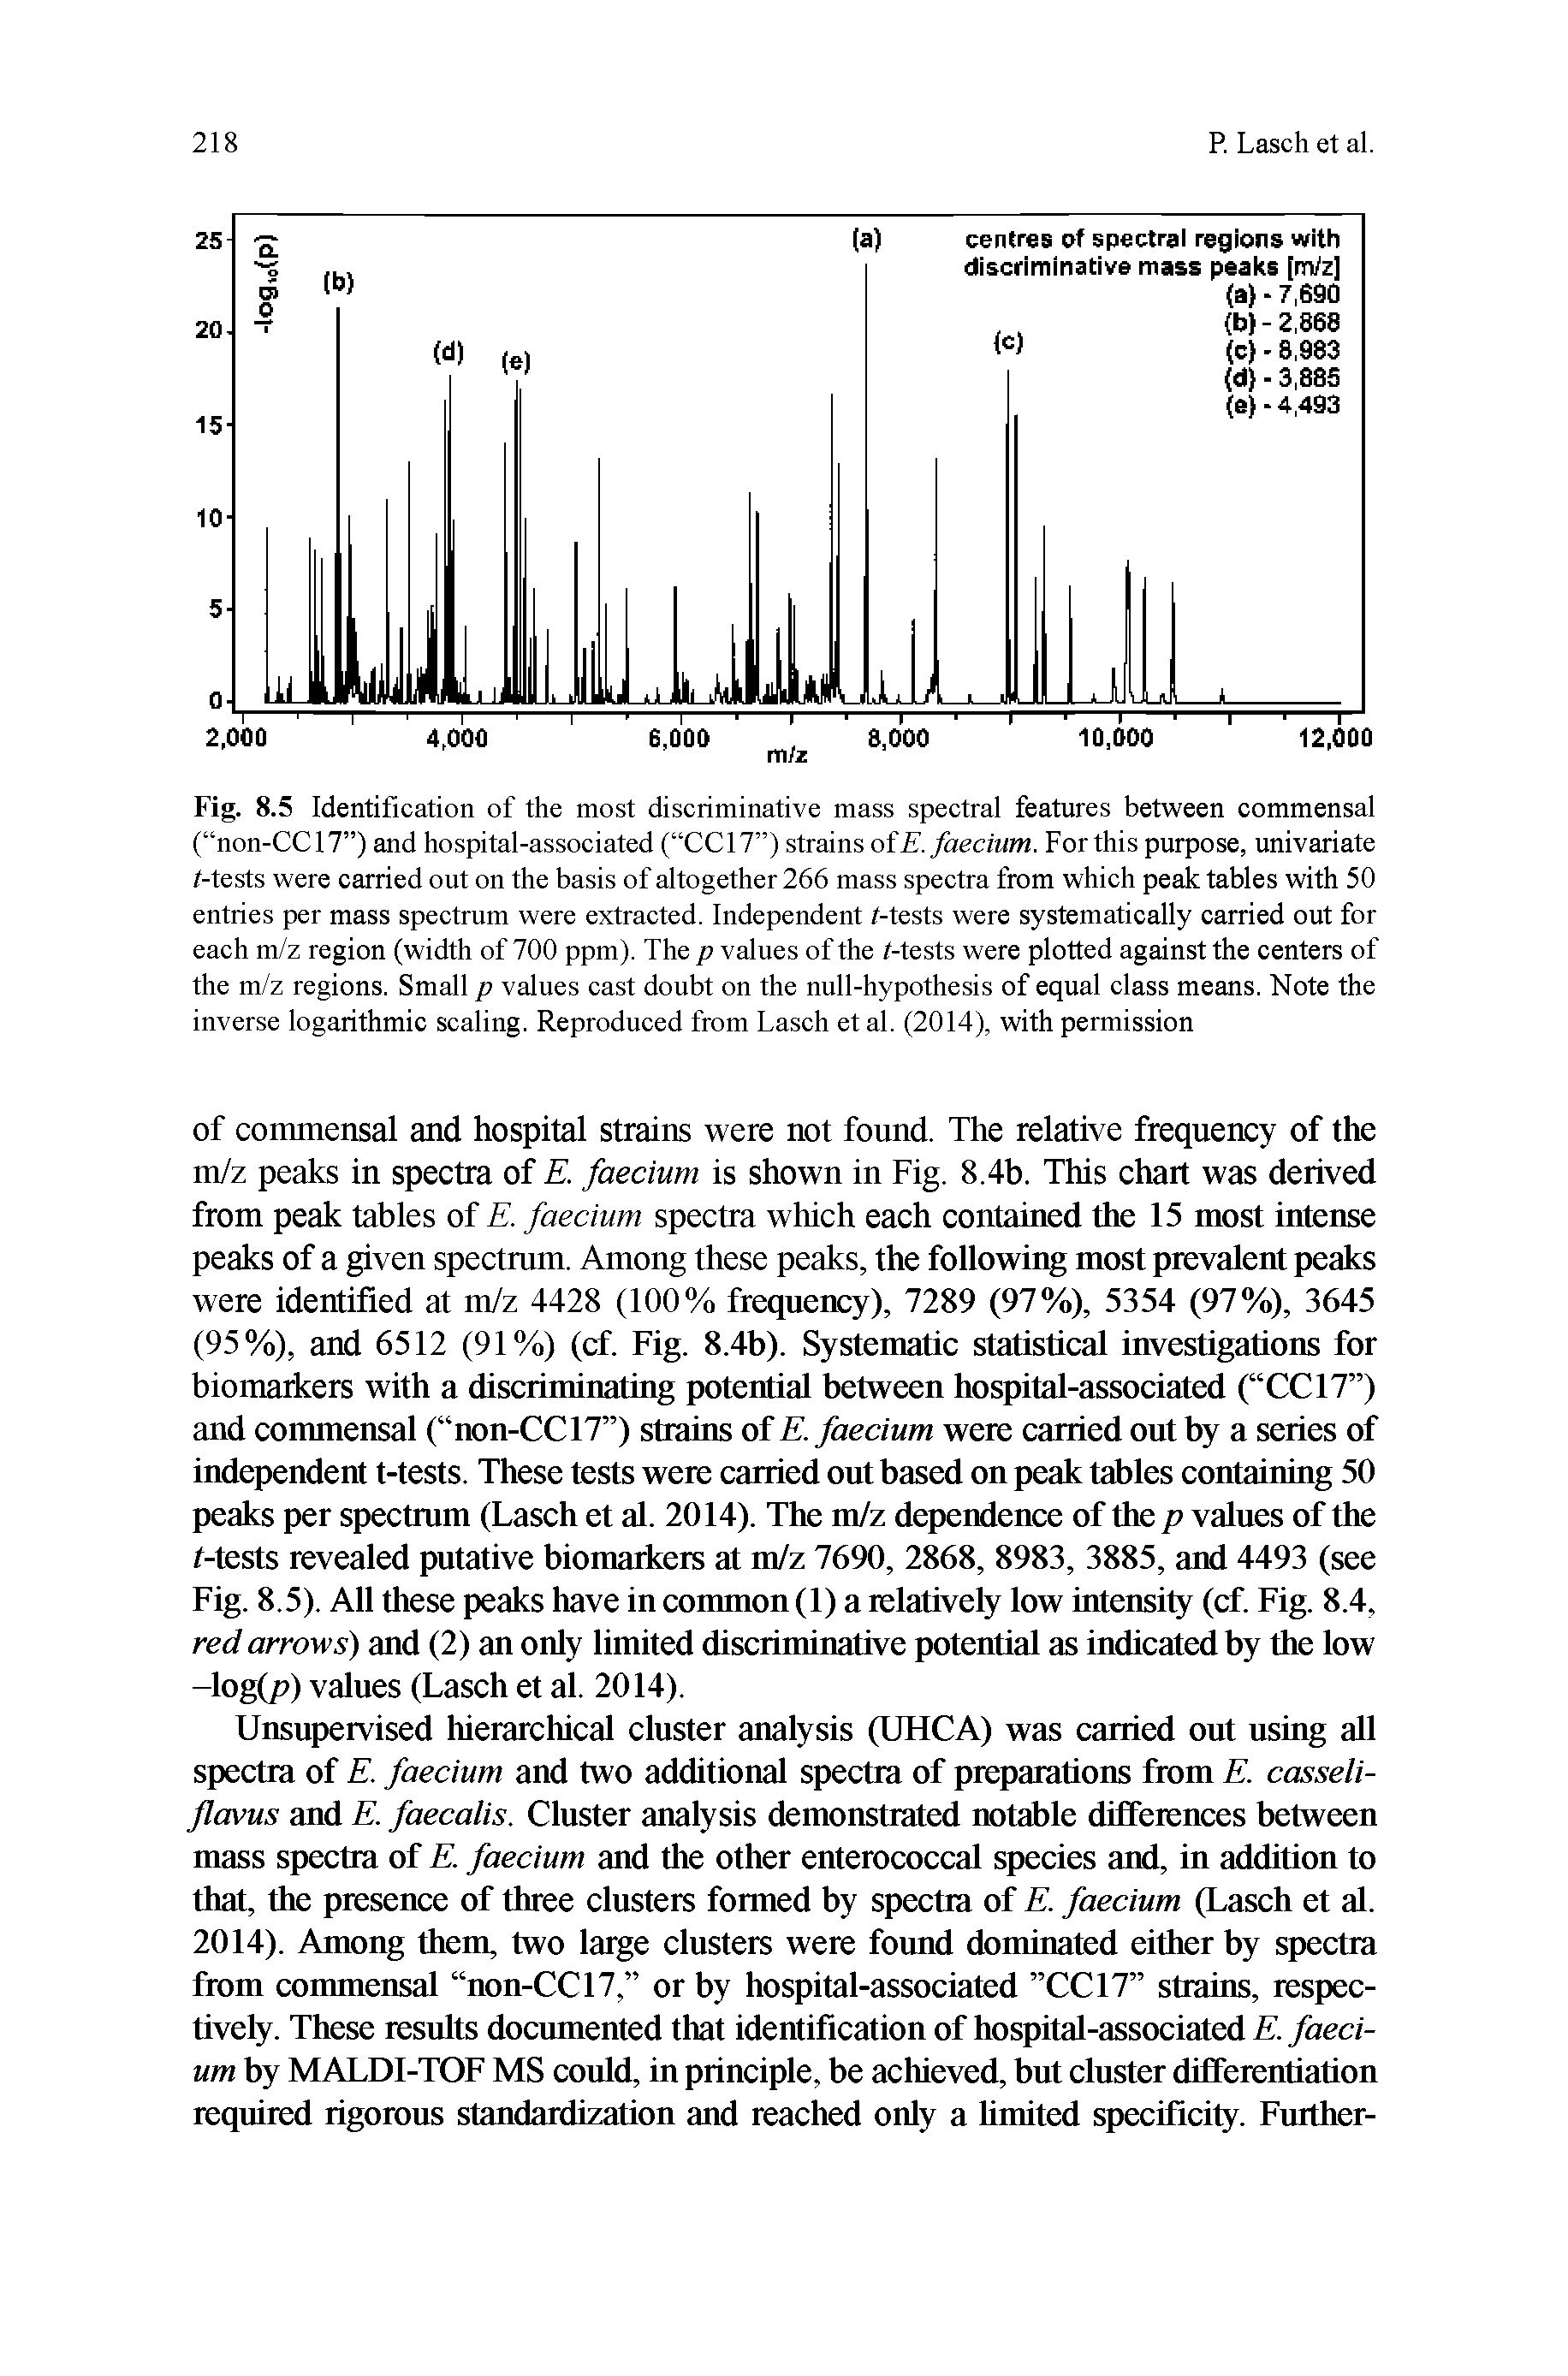 Fig. 8.5 Identification of the most discriminative mass spectral features between commensal ( non-CC17 ) and hospital-associated ( CC17 ) strains oiE.faecium. For this purpose, univariate /-tests were earned out on the basis of altogether 266 mass spectra from which peak tables with 50 entries per mass spectrum were extracted. Independent /-tests were systematically carried out for each m/z region (width of 700 ppm). The p values of the /-tests were plotted against the centers of the m/z regions. Small p values cast doubt on the null-hypothesis of equal class means. Note the inverse logarithmie scaling. Reproduced from Lasch et al. (2014), with permission...